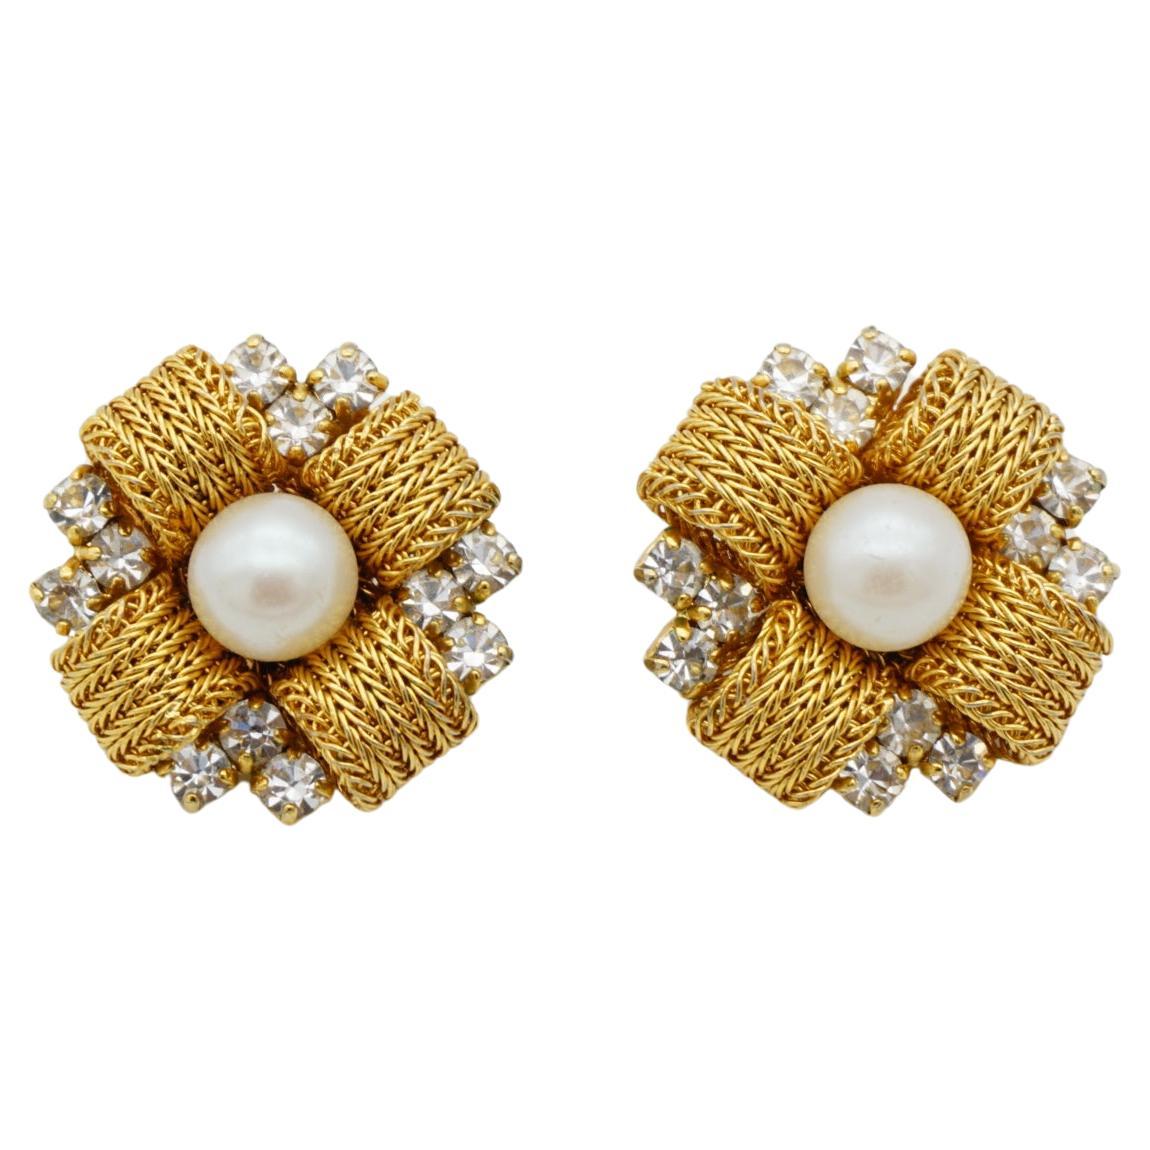 Christian Dior 1969 Vintage Woven Cross Pearl Crystal Flower Clip Gold Earrings For Sale